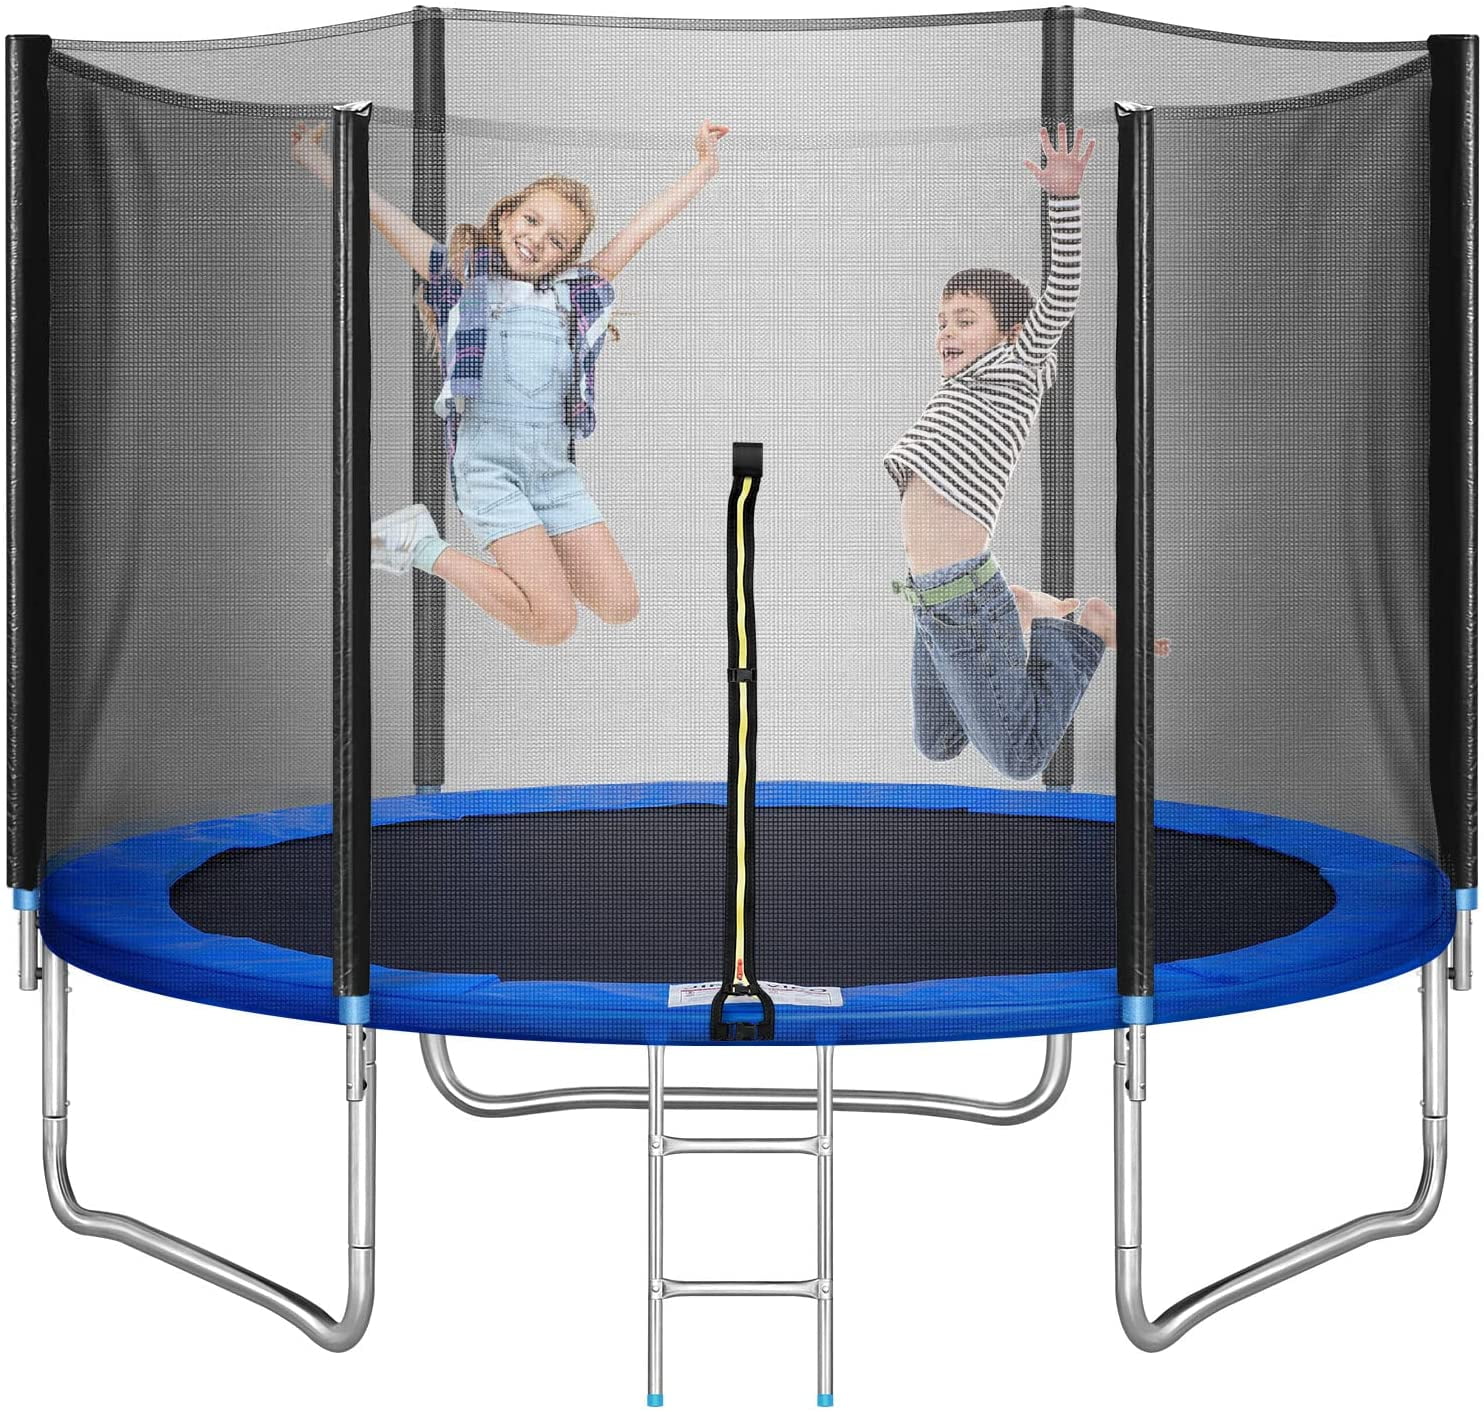 12FT Round Trampoline Combo Safety Enclosure Bounce Jump Net w/Spring Pad&Ladder 